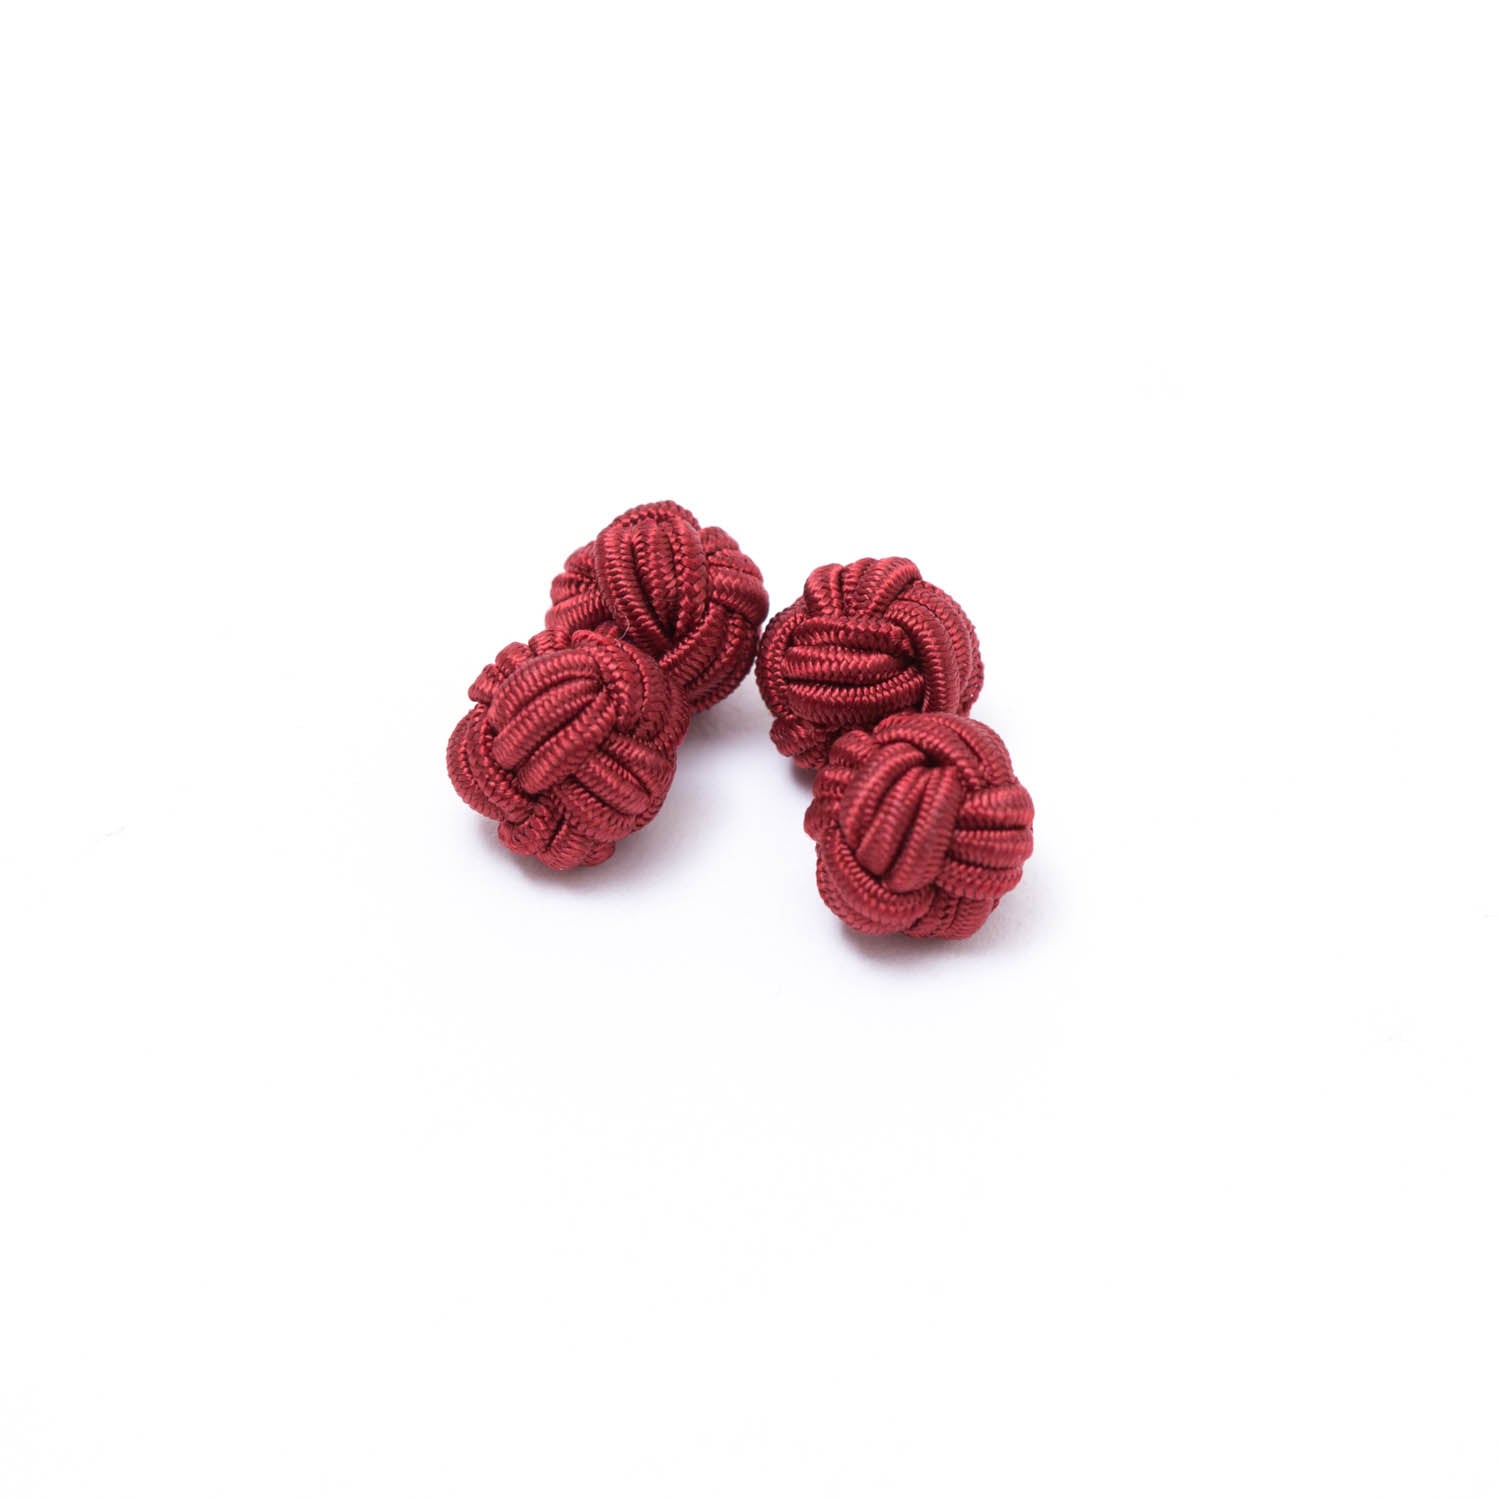 Solid Knot Cuff Links